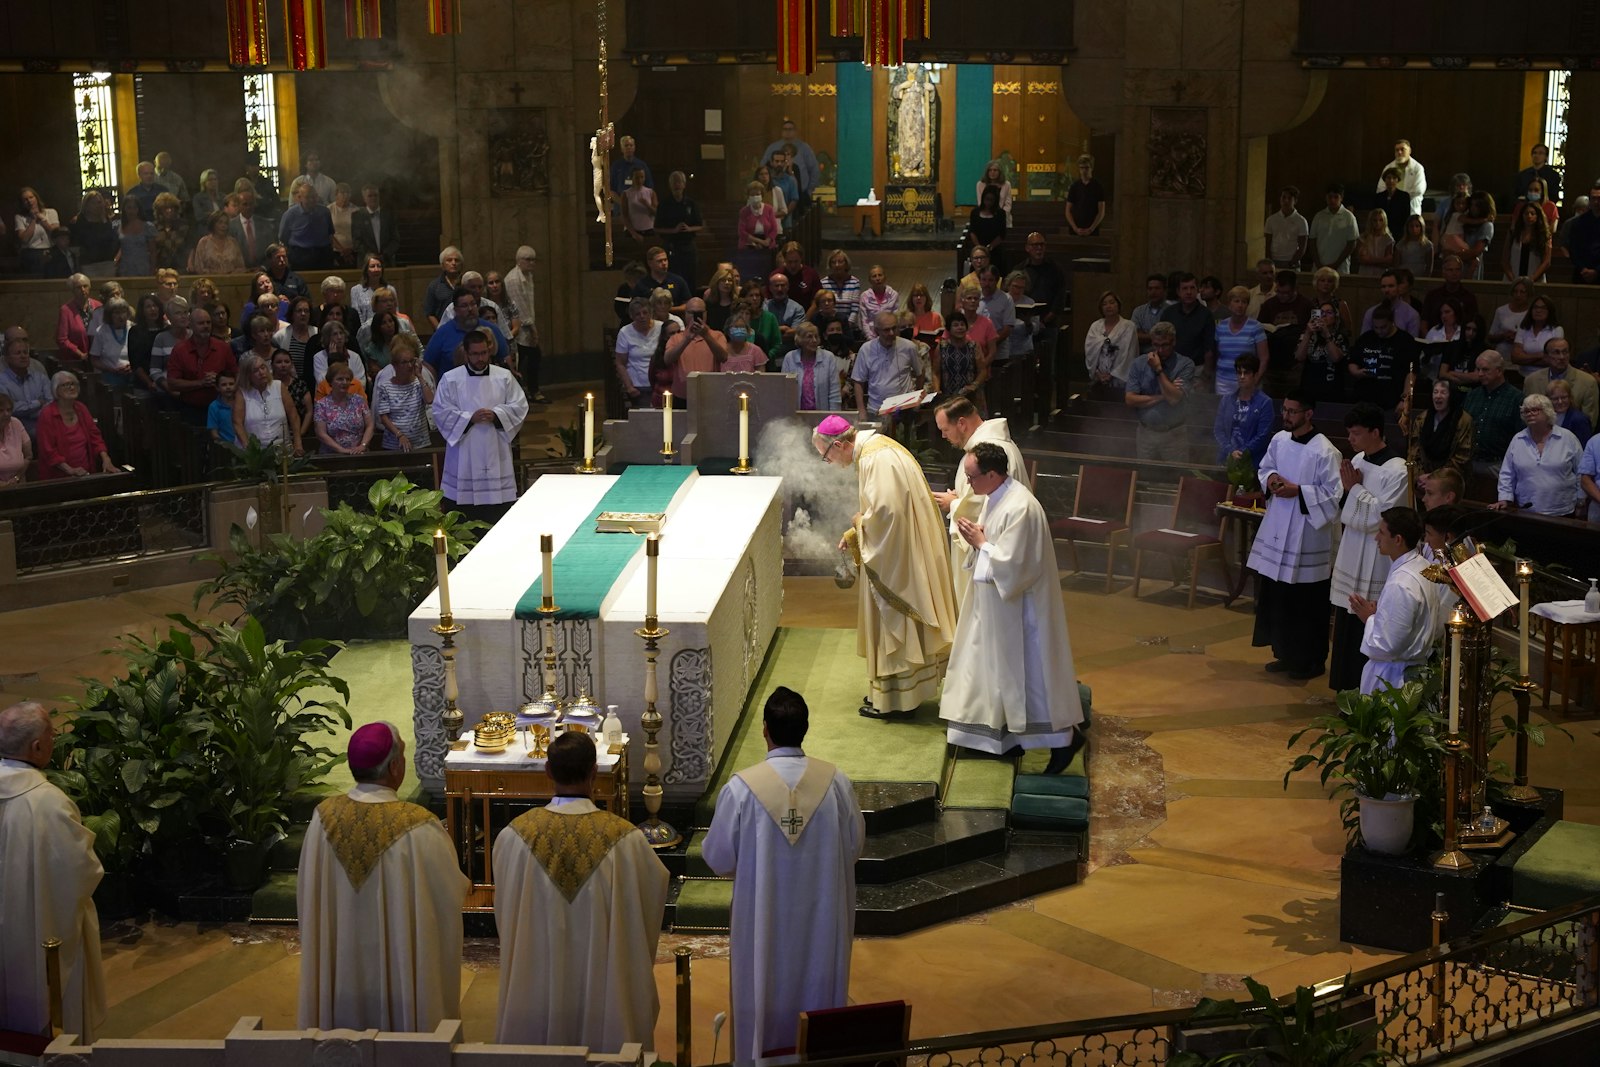 Bishop Robert Barron celebrated Mass after his keynote address during the “Live at the Basilica” event, with Detroit Auxiliary Bishop Robert Fisher and Fr. Joe Horn, rector National Shrine of the Basilica.